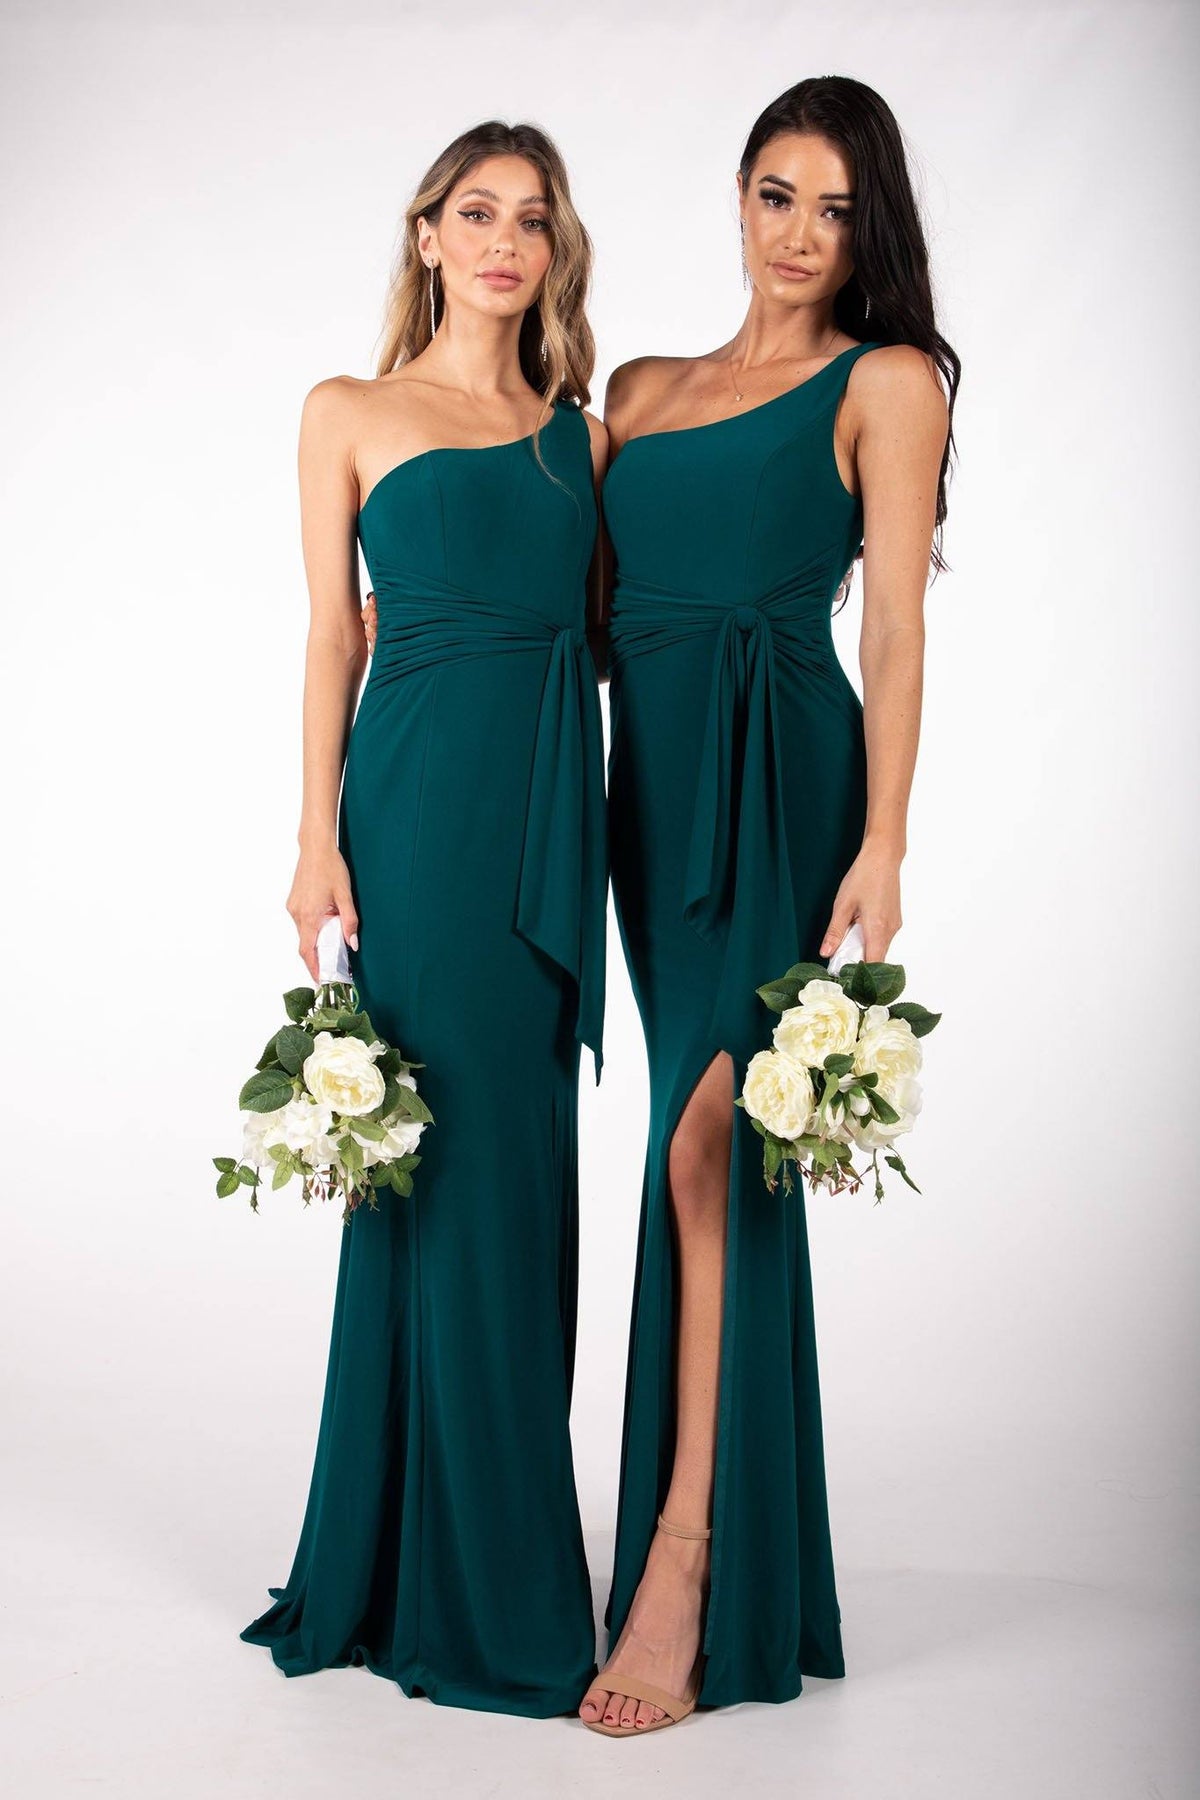 Emerald Green Bridesmaids One Shoulder Maxi-Length Dress with Asymmetrical Neckline, Waist Tie, Above Knee High Slit, and a Column Styled Silhouette